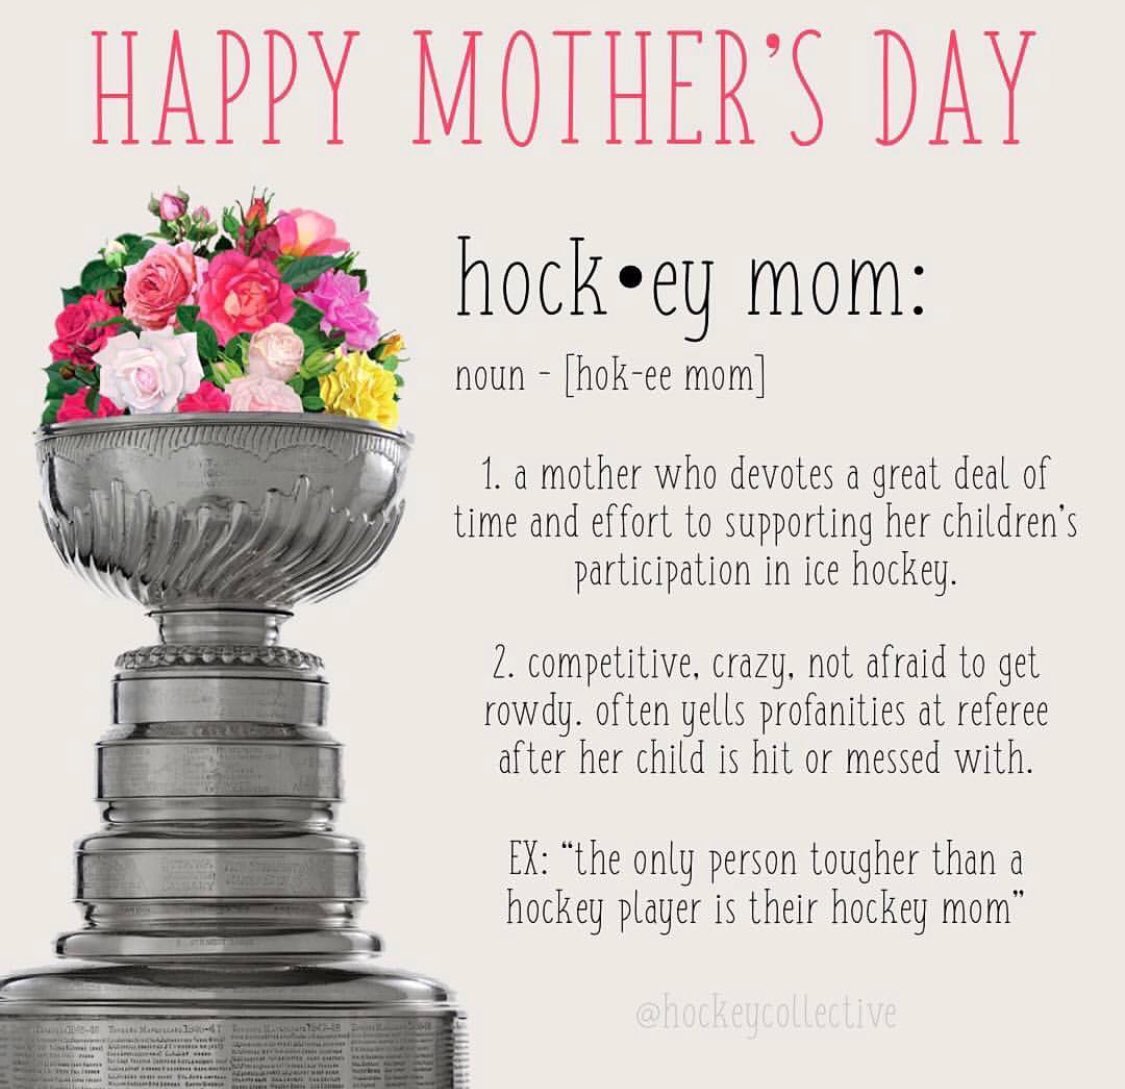 Happy Mother’s Day to all the hockey moms!